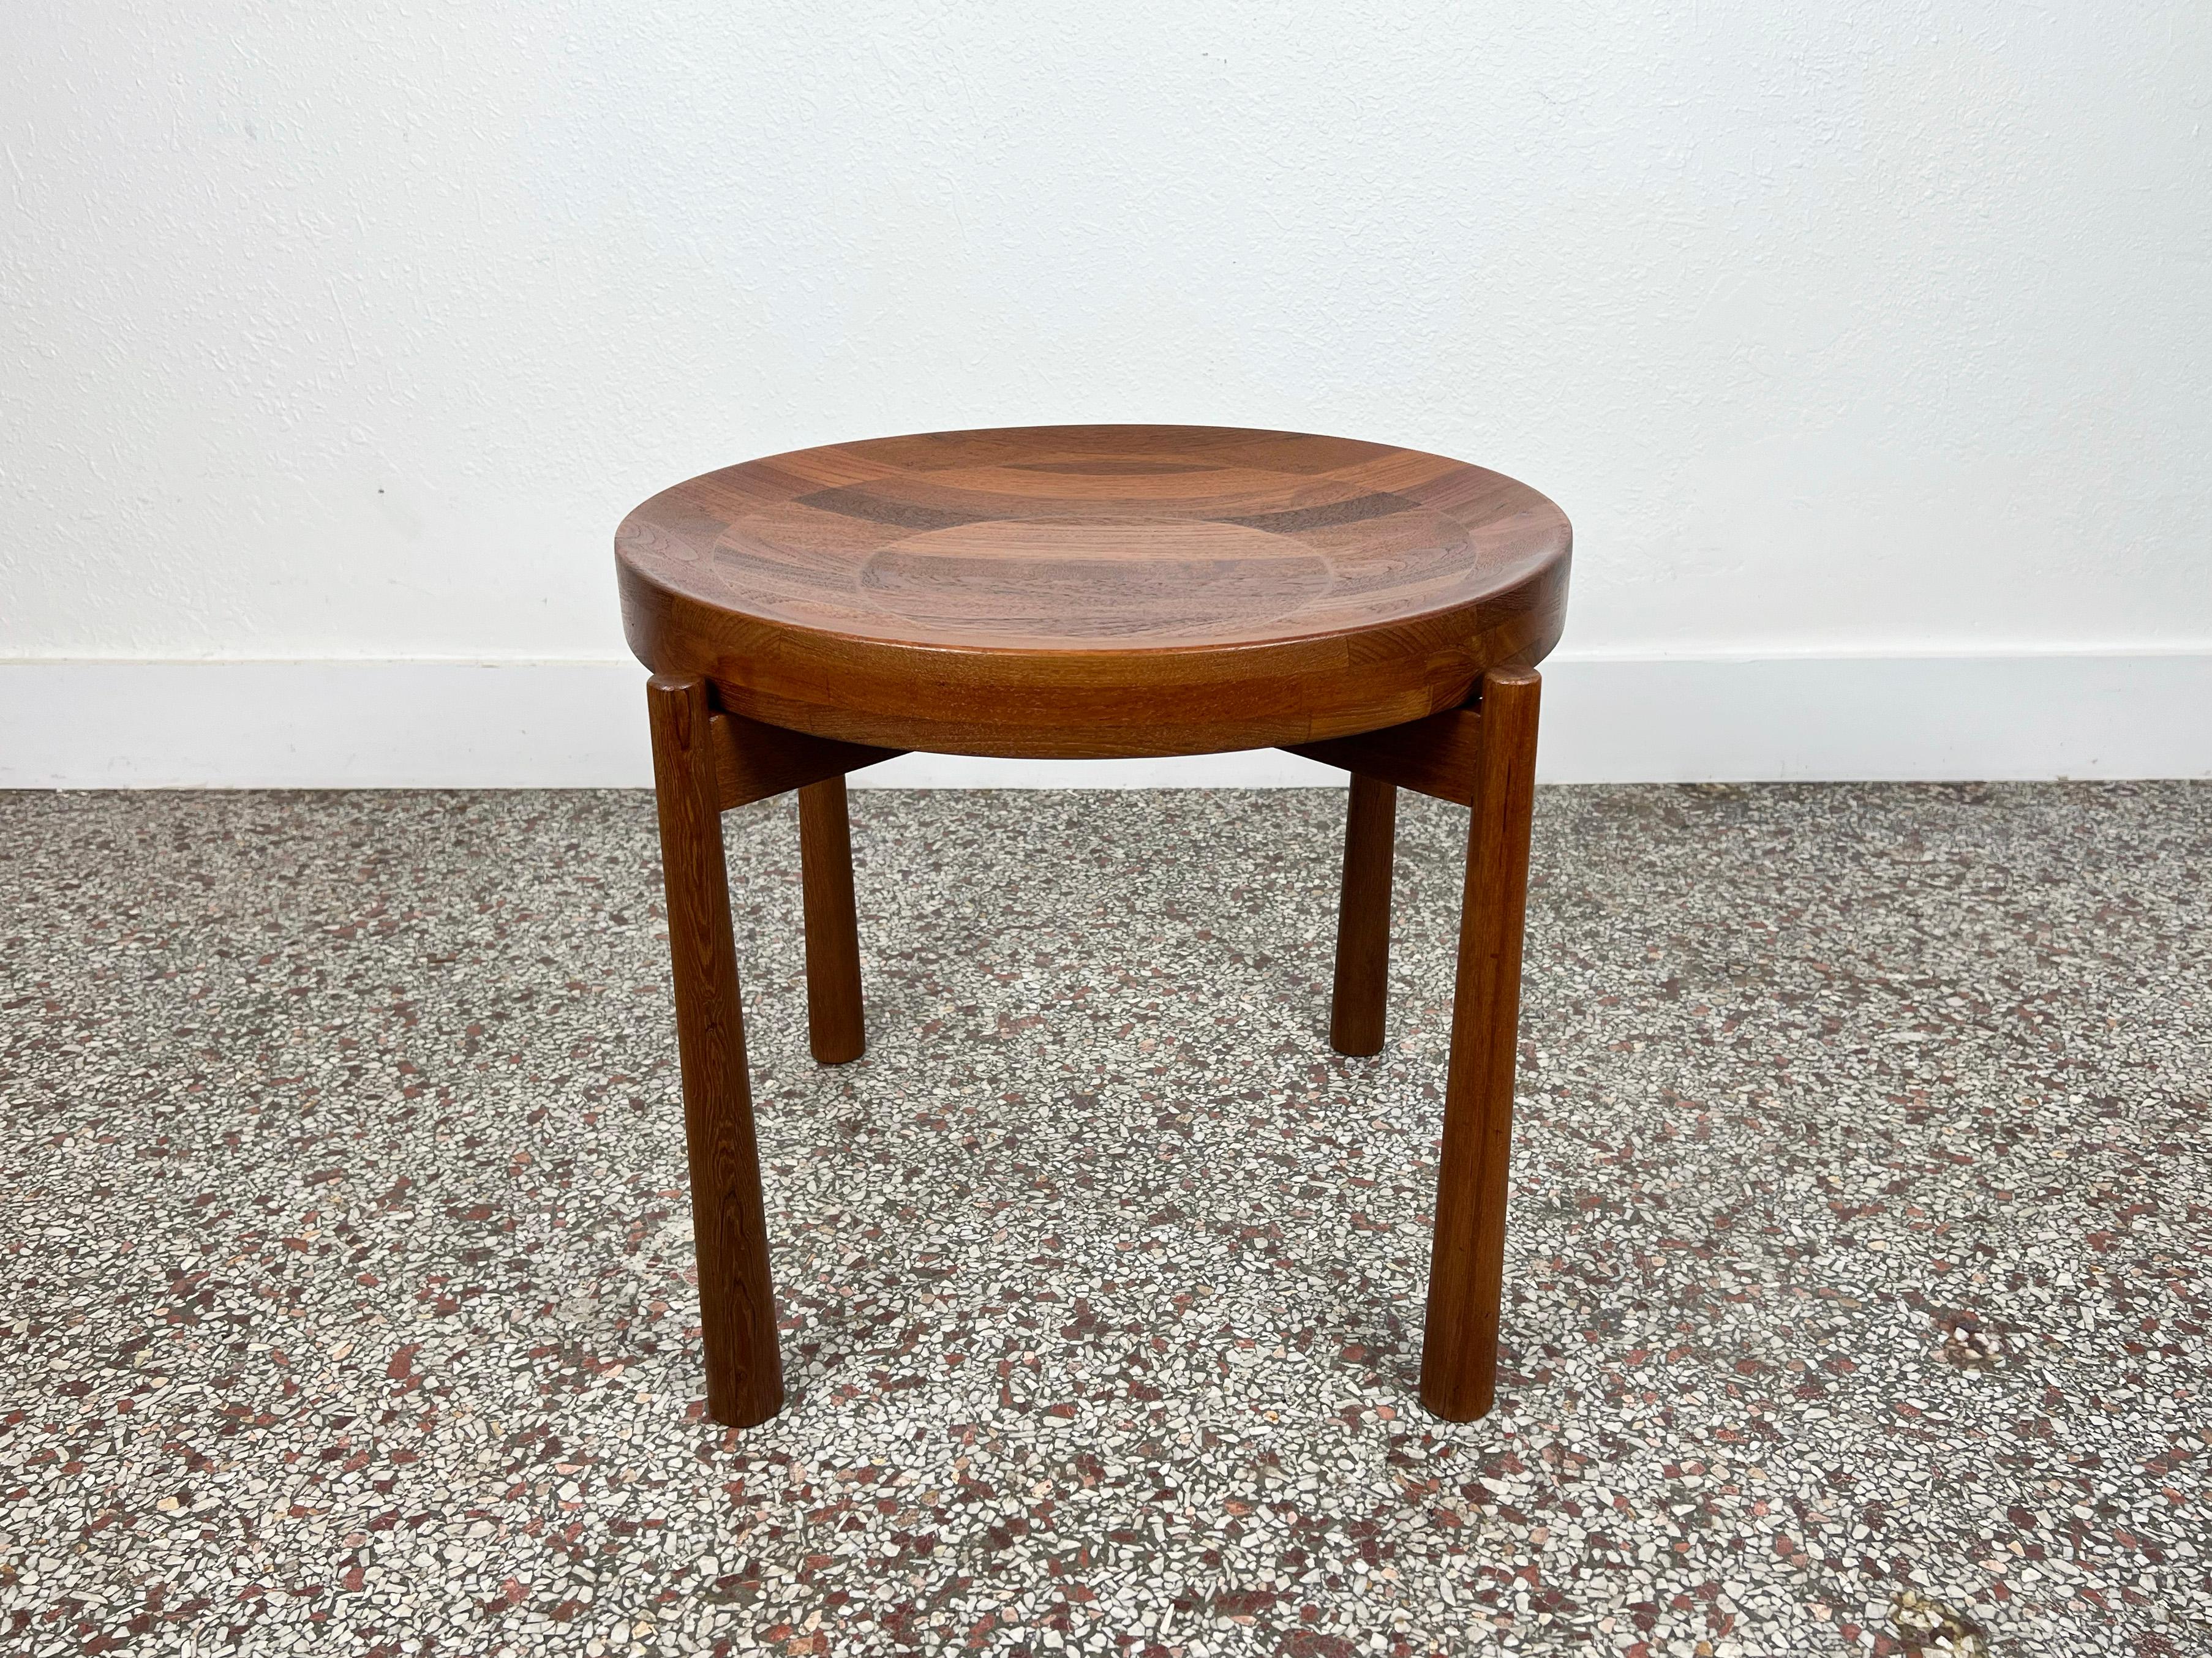 Vintage side table designed by Jens Quistgaard with a free-floating two-sided top crafted in solid teak. One side of the top provides a flat surface, while the other a bowl-shaped concave surface. 

Designer: Jens Quistgaard

Manufacturer: